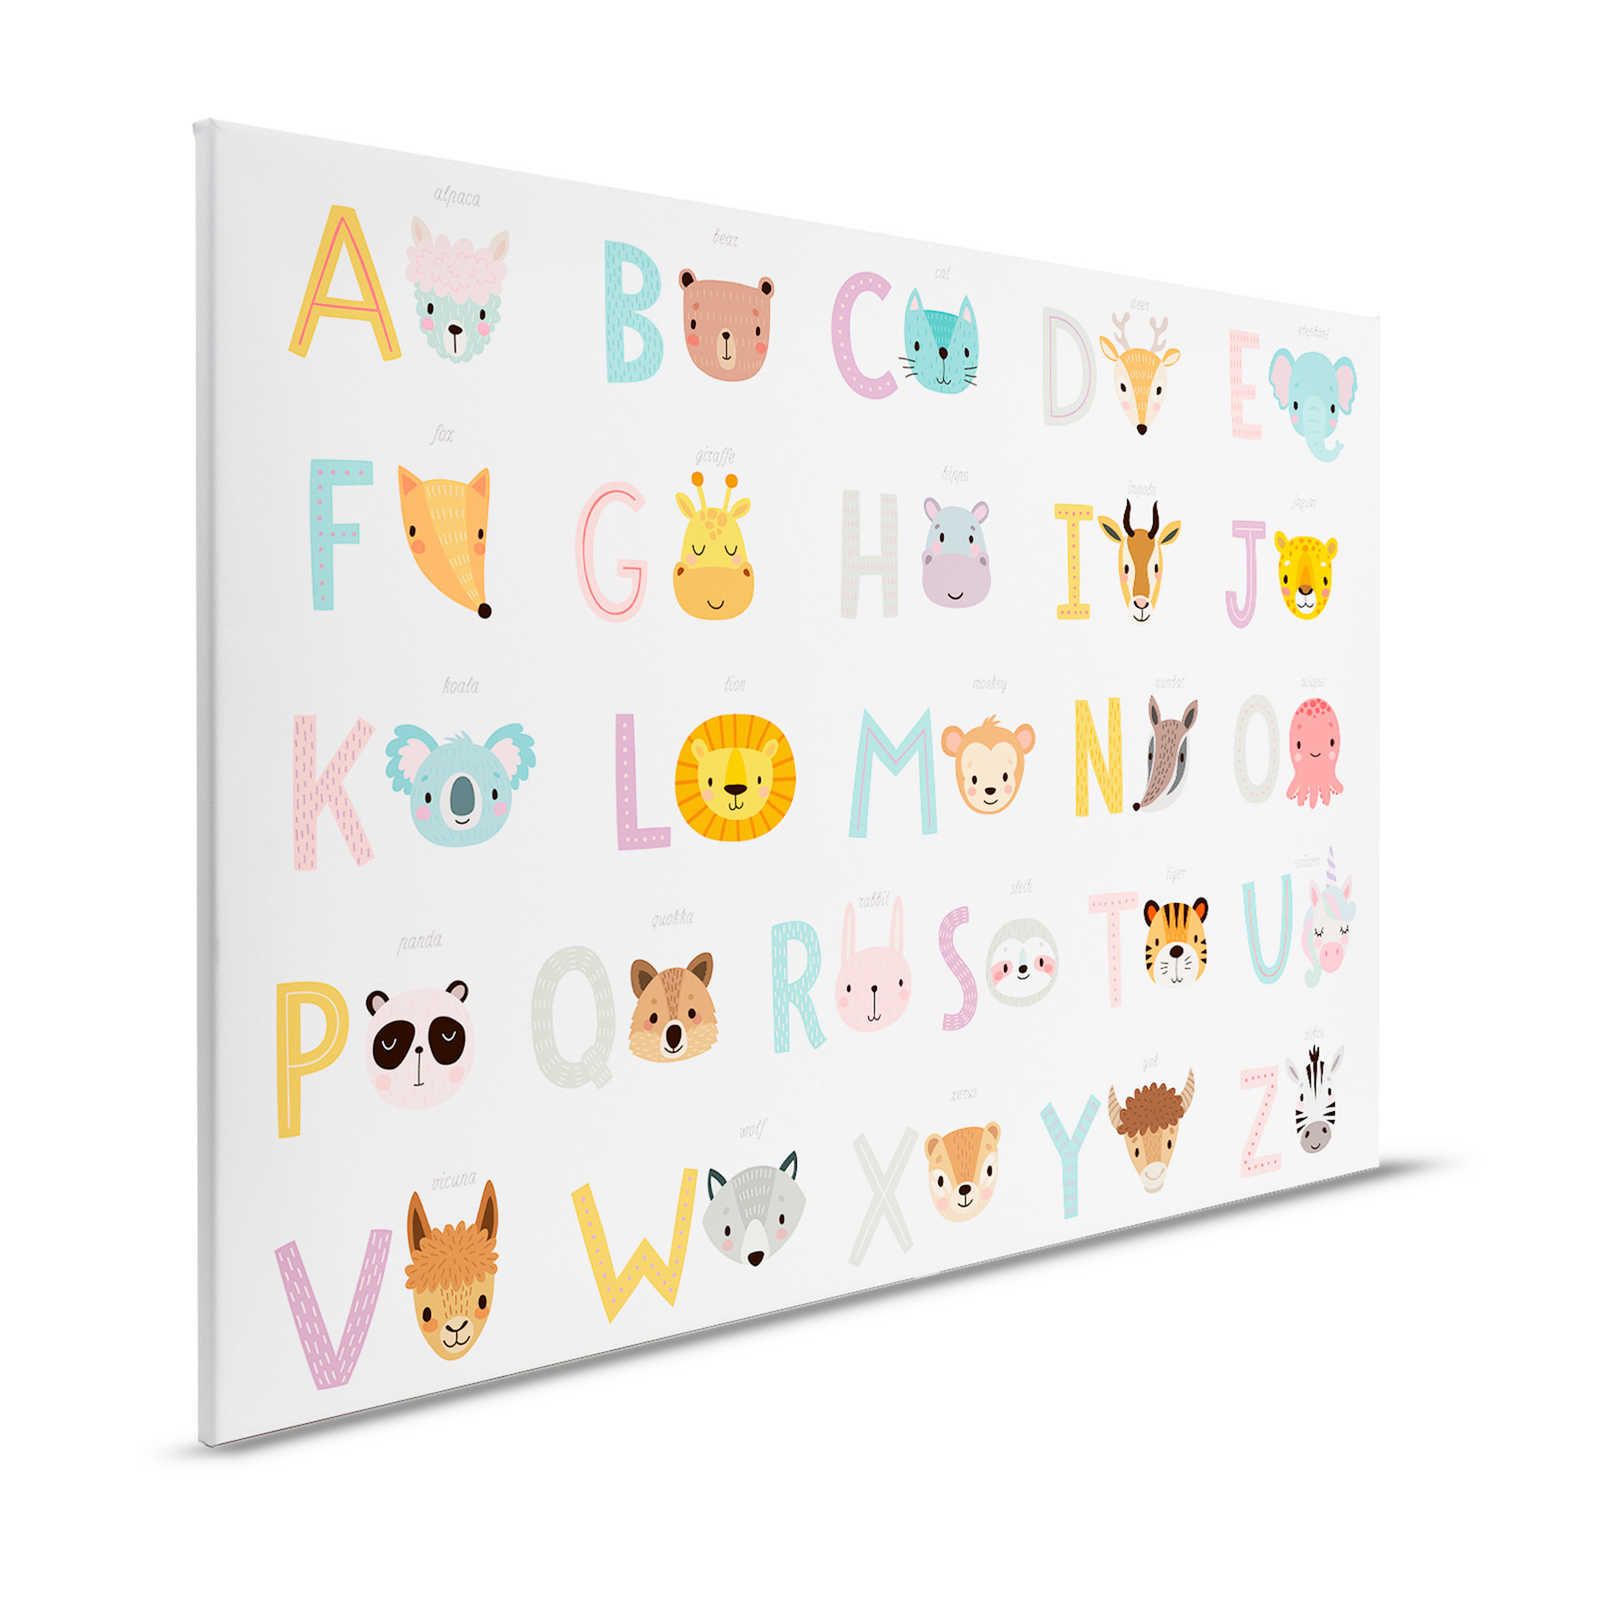 Canvas ABC with animals and animal names - 120 cm x 80 cm
